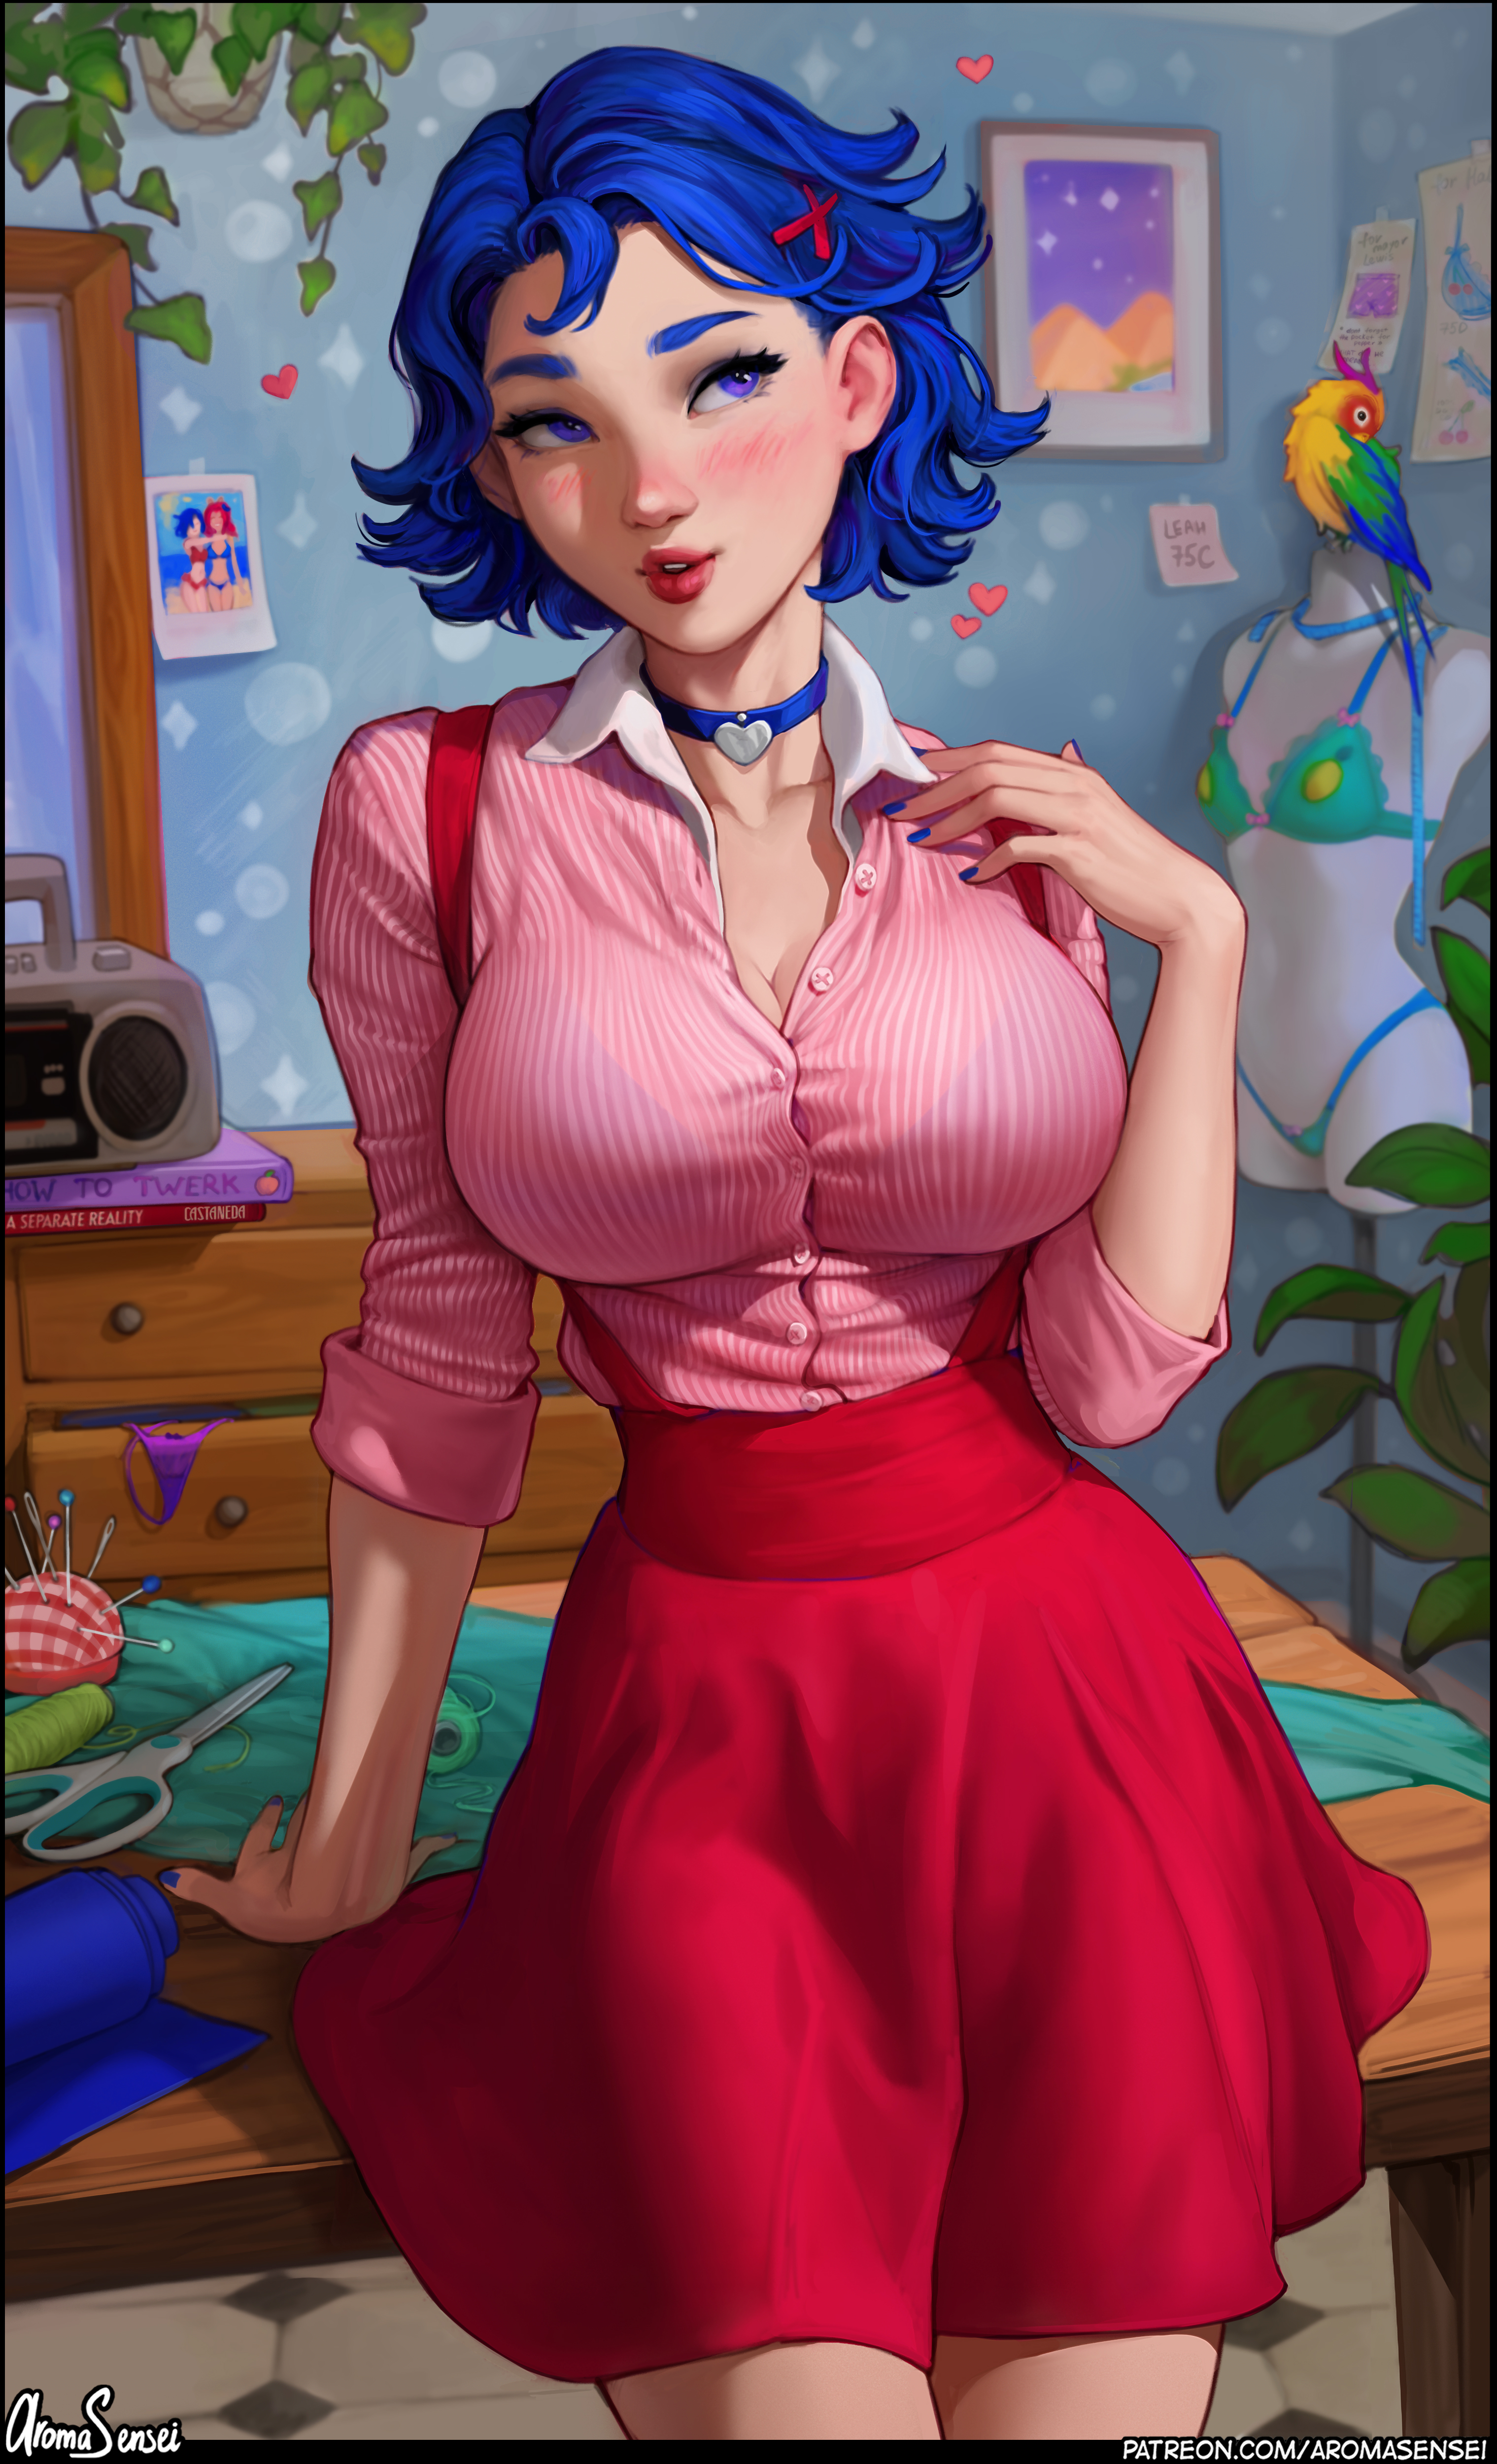 Emily Stardew Valley Stardew Valley Video Games Video Game Girls Video Game Characters Artwork Drawi 3038x5000